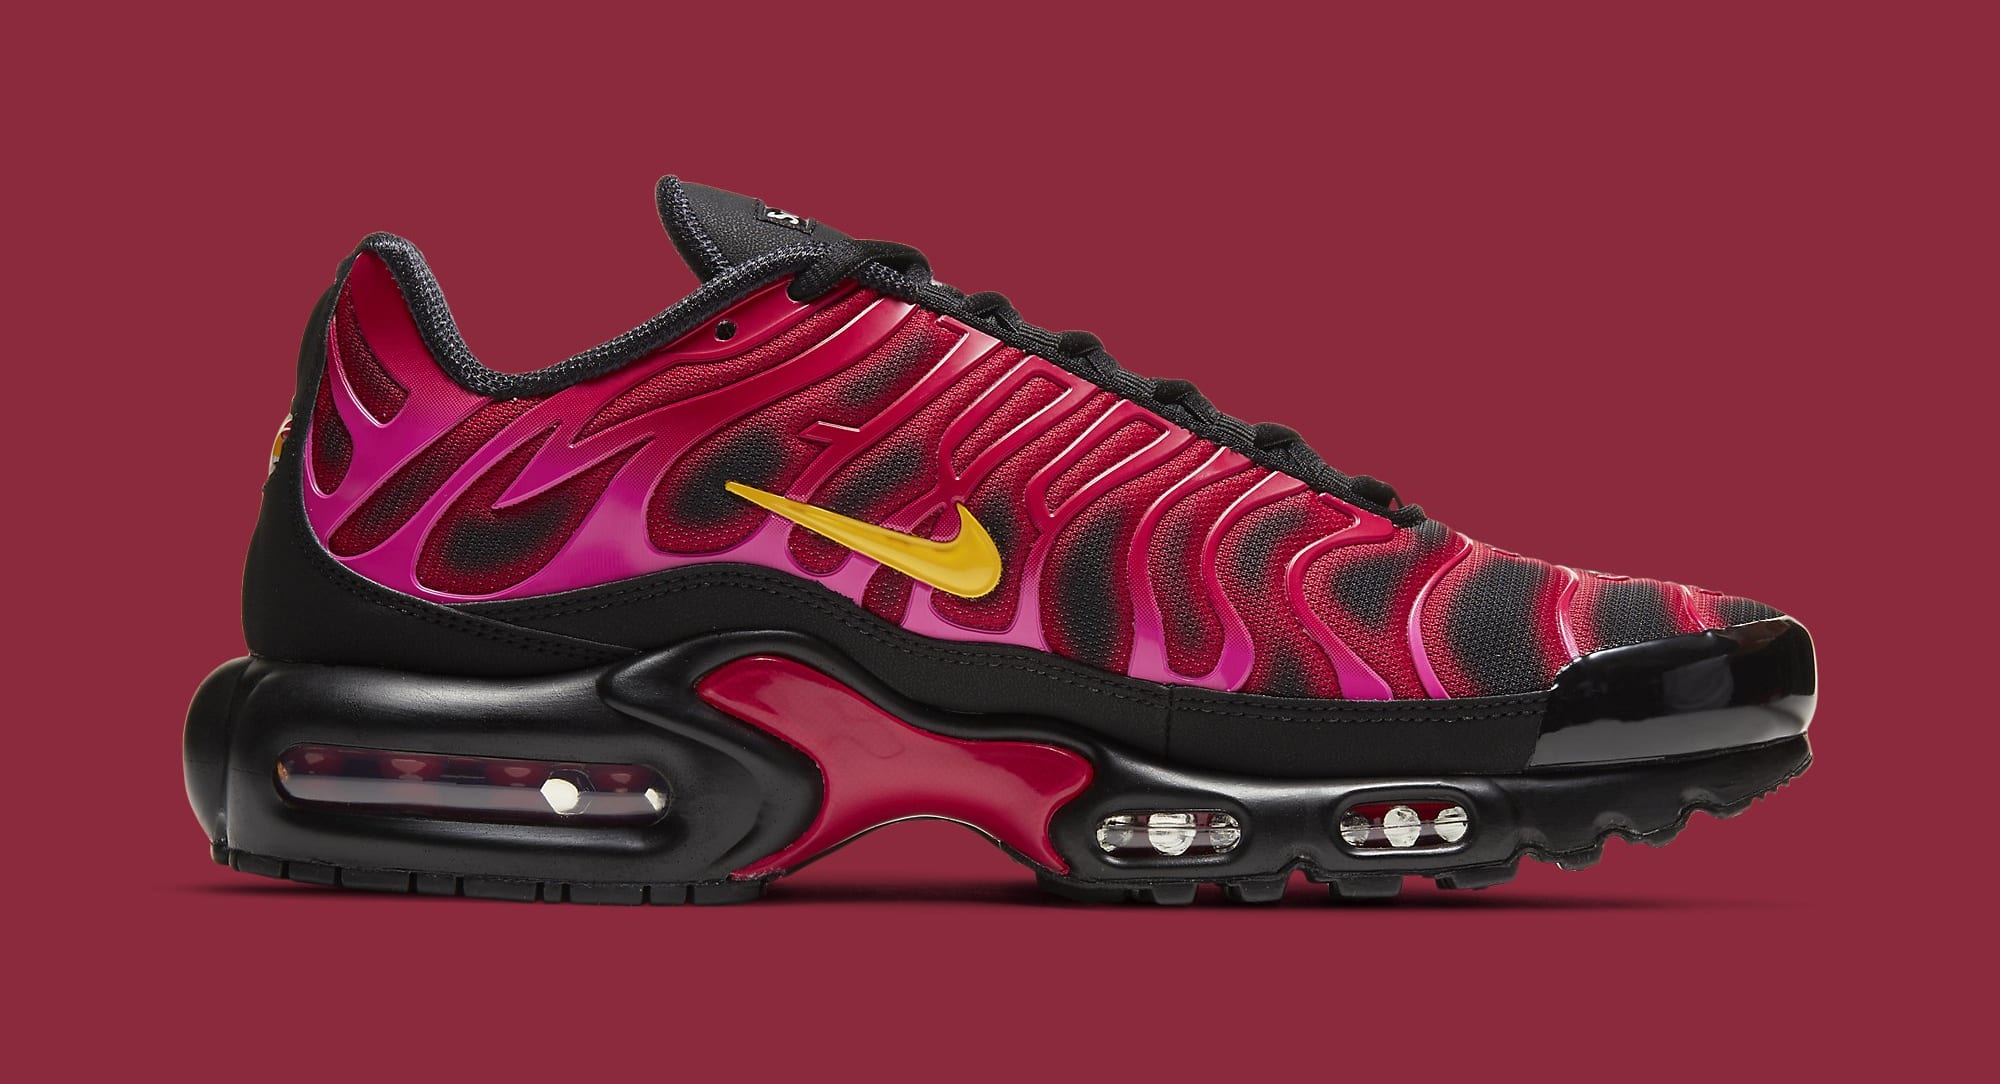 Supreme x Nike Air Max Plus Release Date October 2020 | Sole Collector